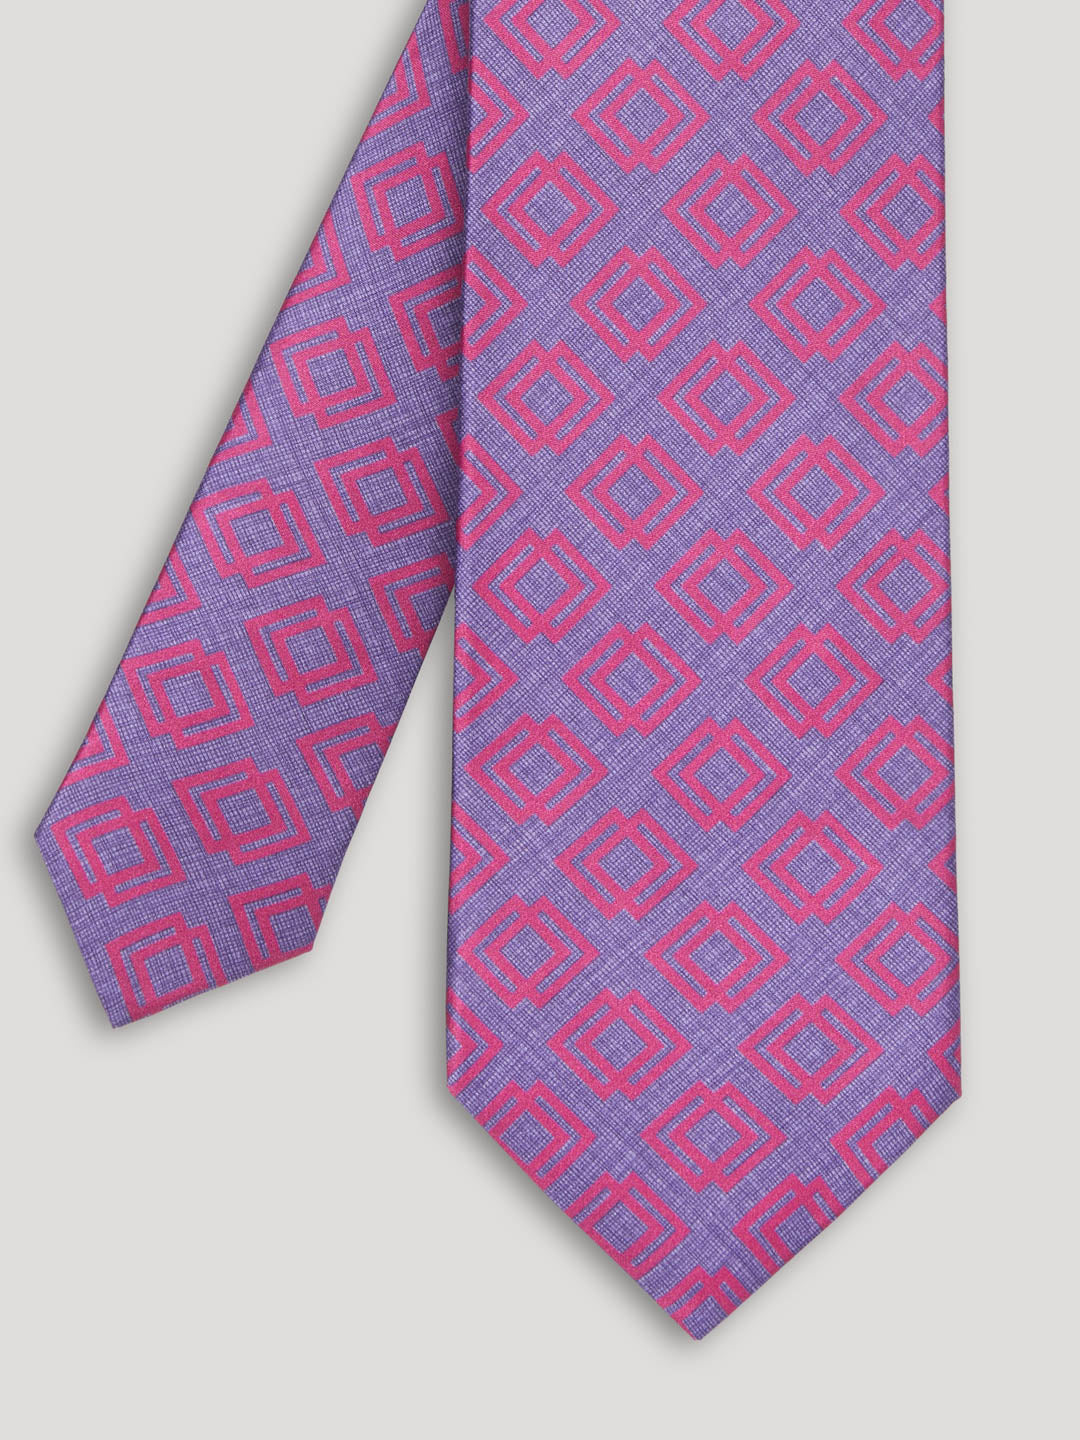 Pink and purple tie with geometric design. 